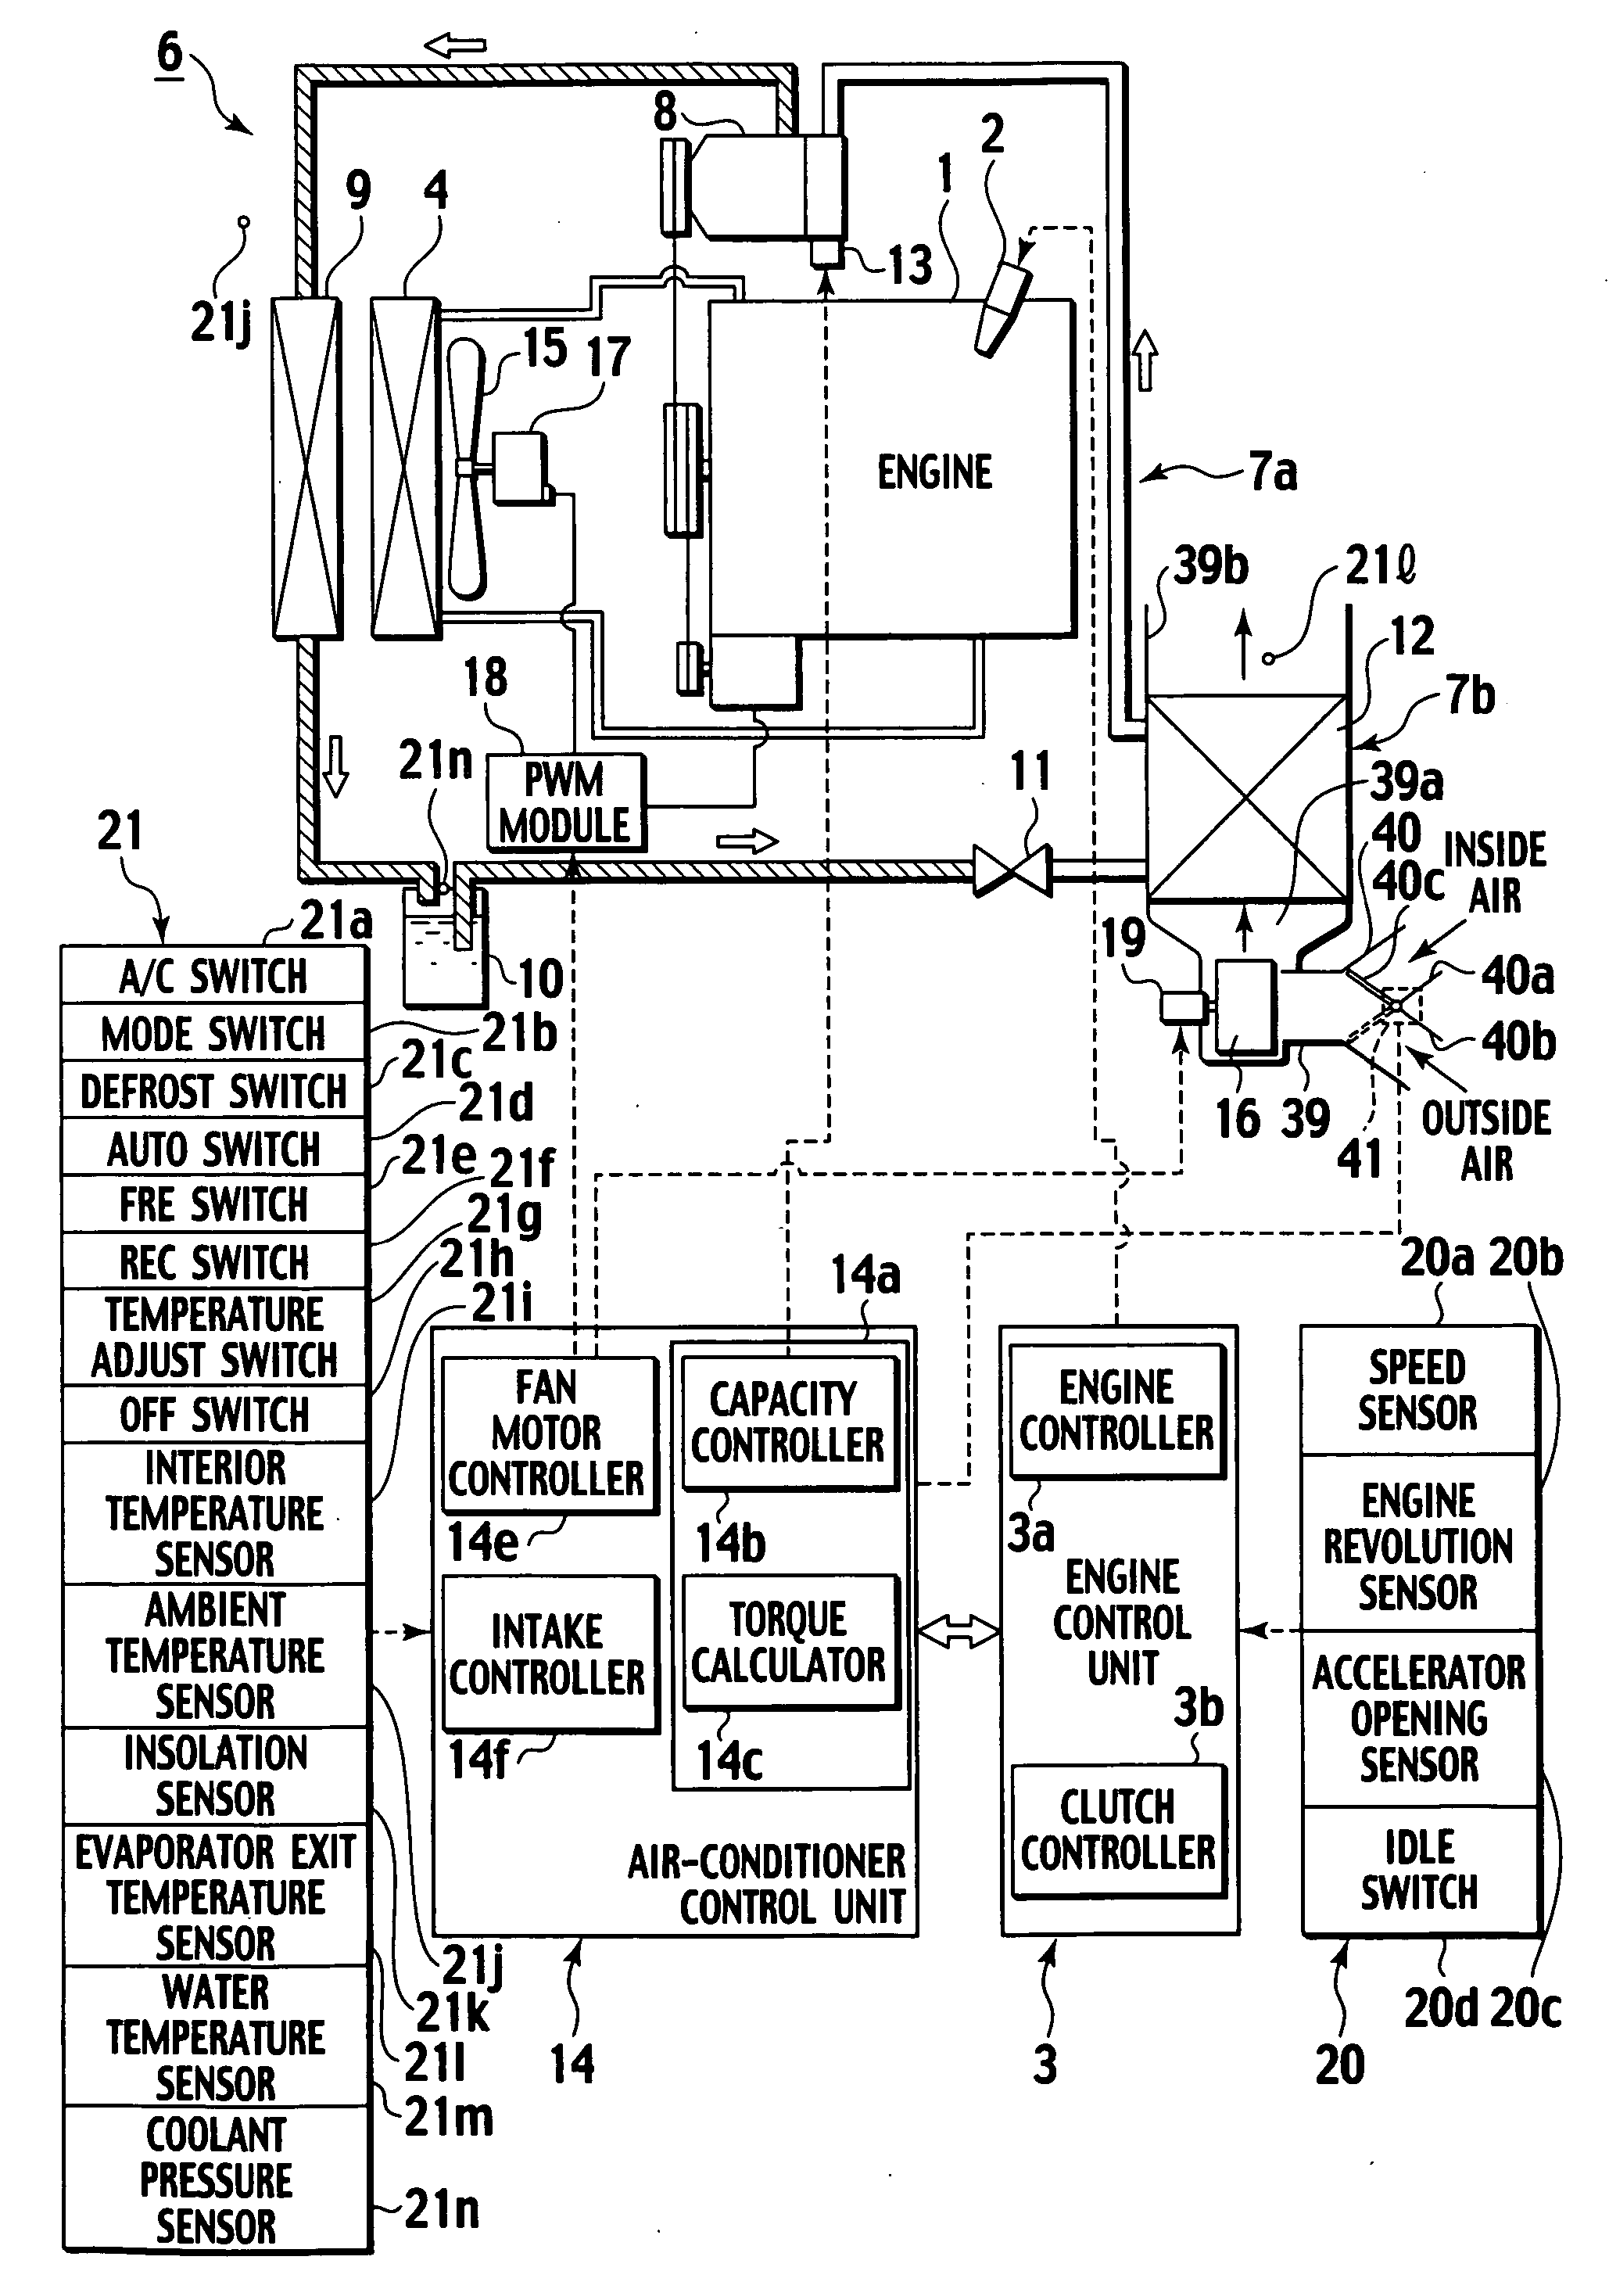 Apparatus for and method of calculating torque of variable capacity compressor